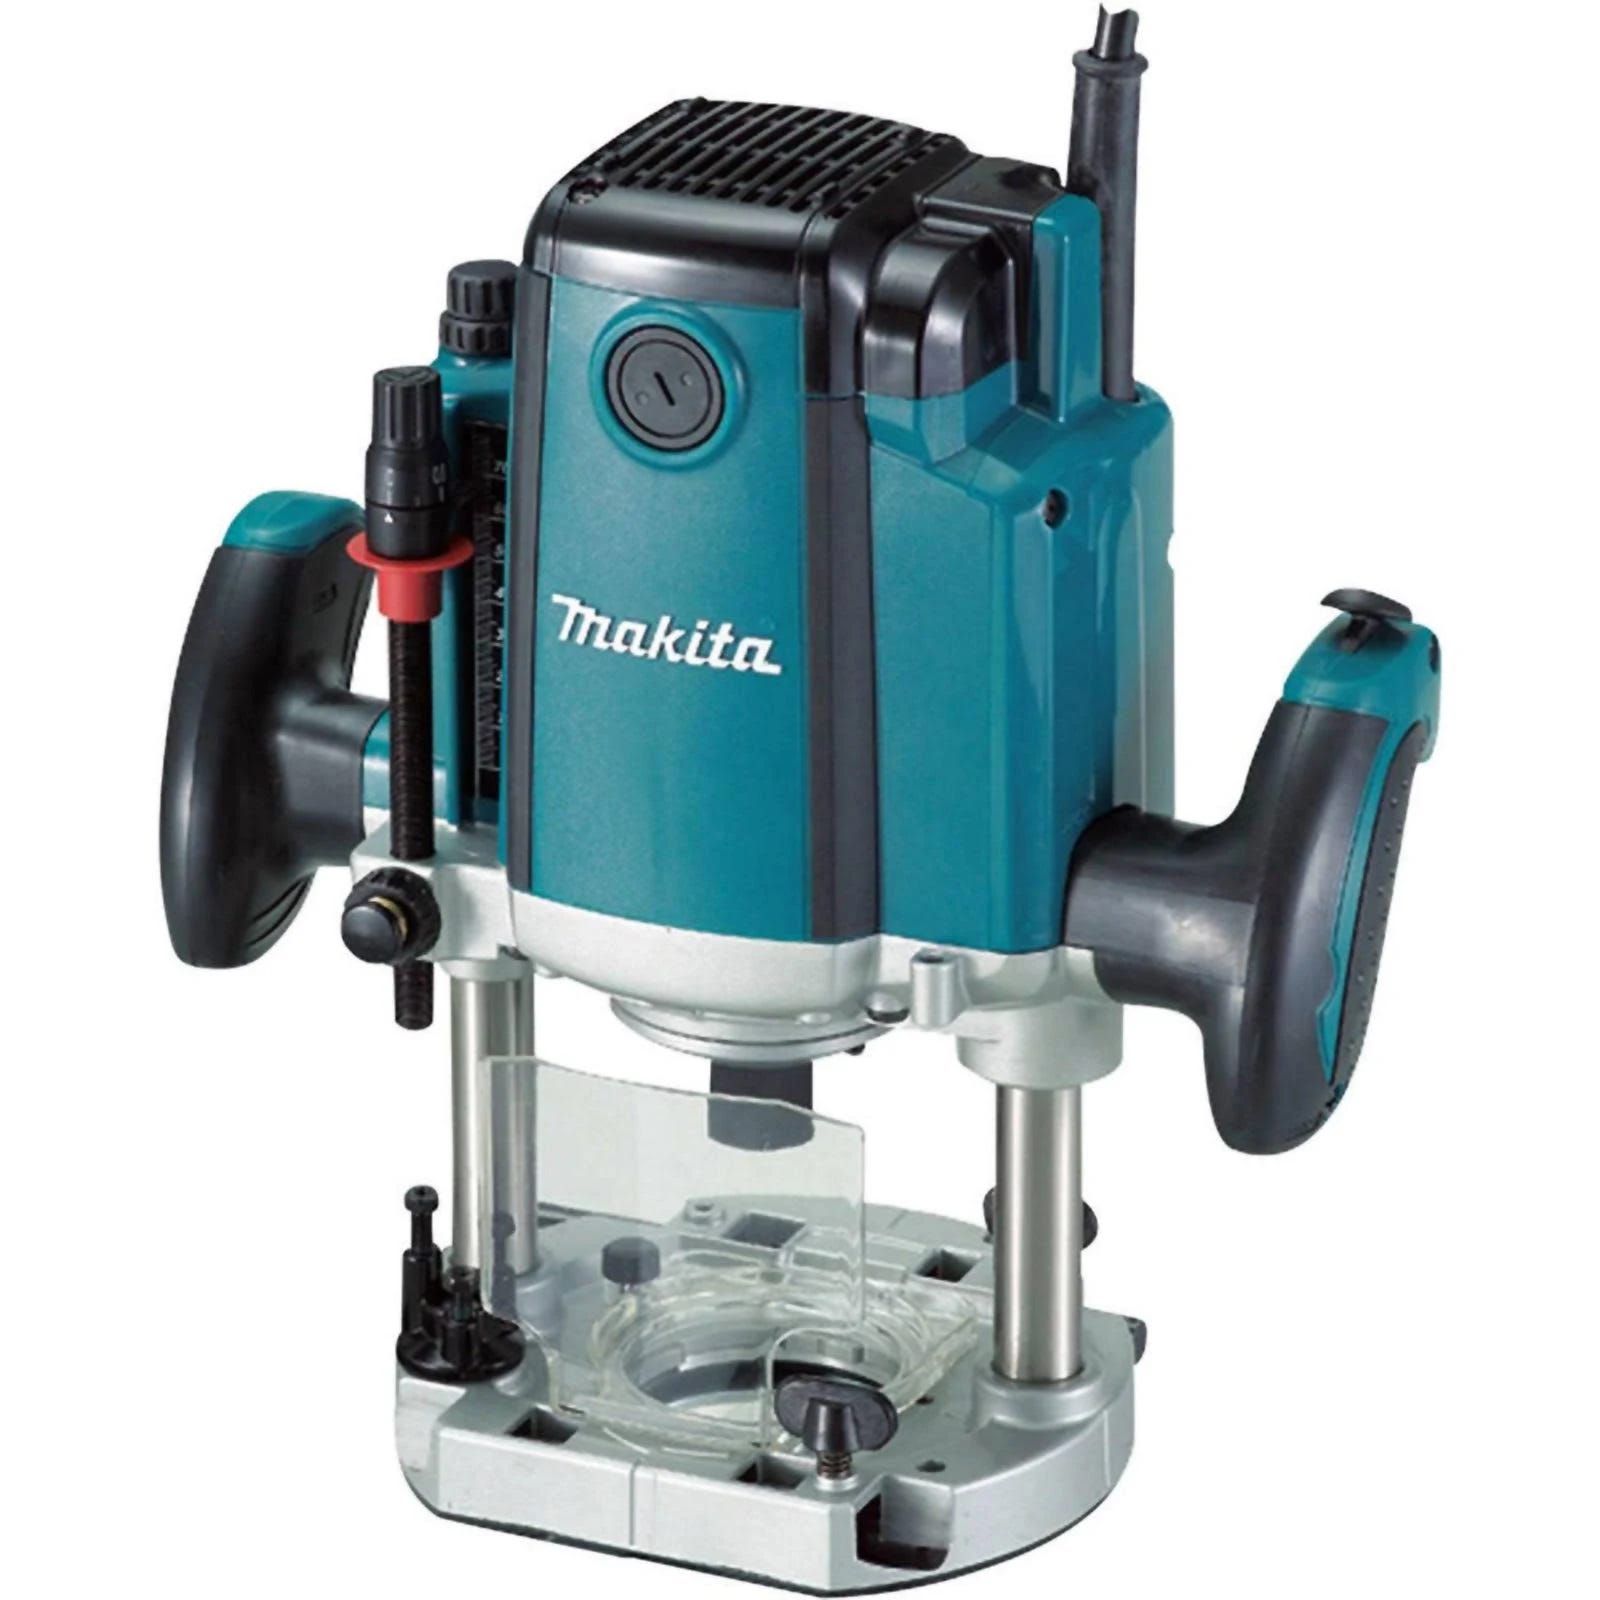 Makita RP1800 Plunge Router - 3-1/4 HP Performance | Image